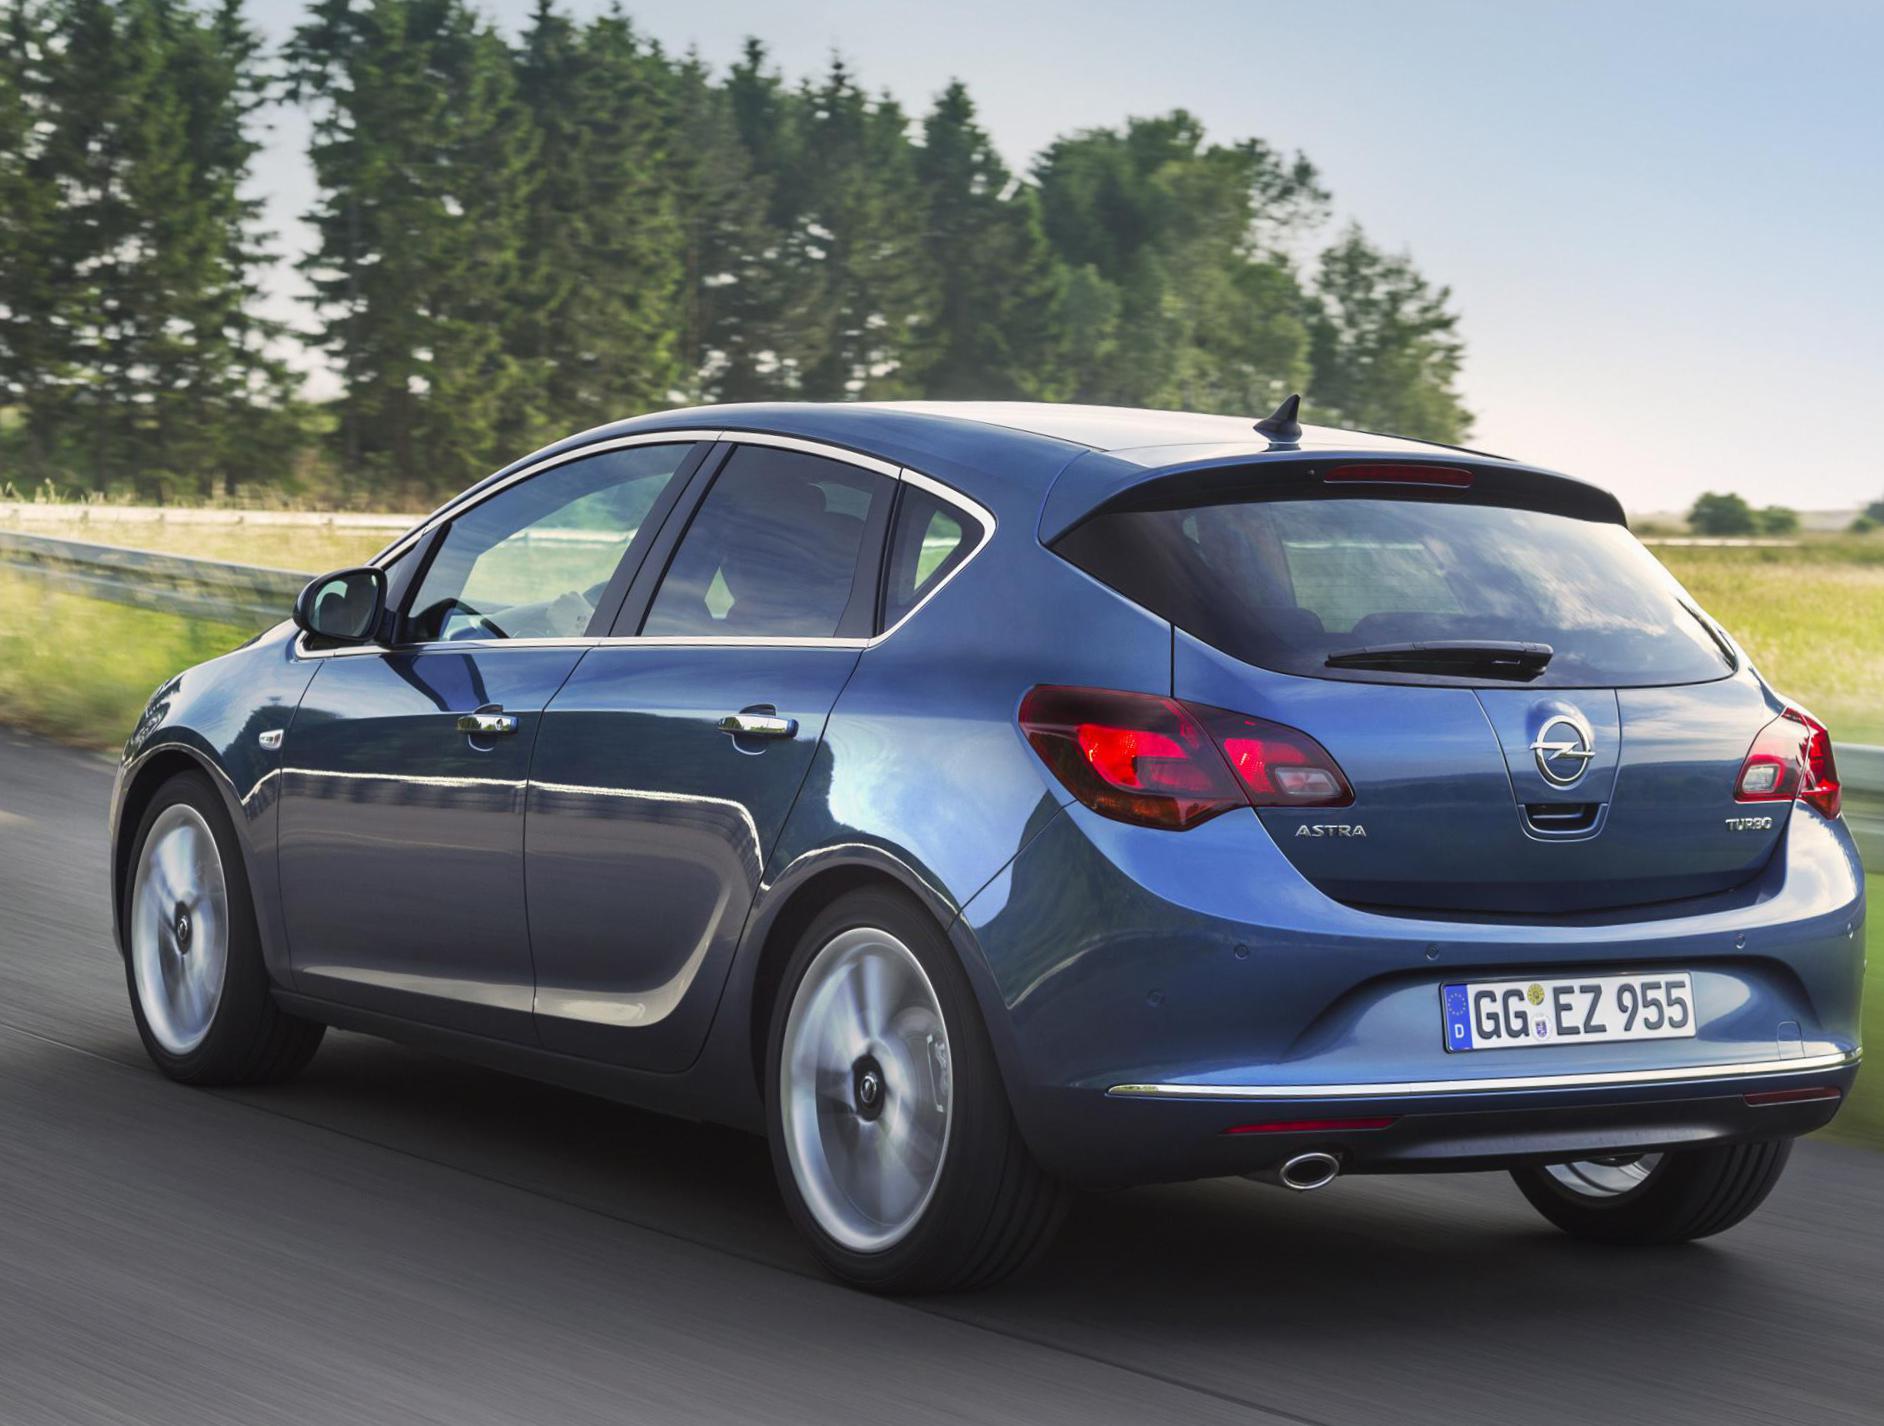 Opel Astra J Hatchback Photos And Specs Photo Opel Astra J Hatchback Specifications And 24 Perfect Photos Of Opel Astra J Hatchback